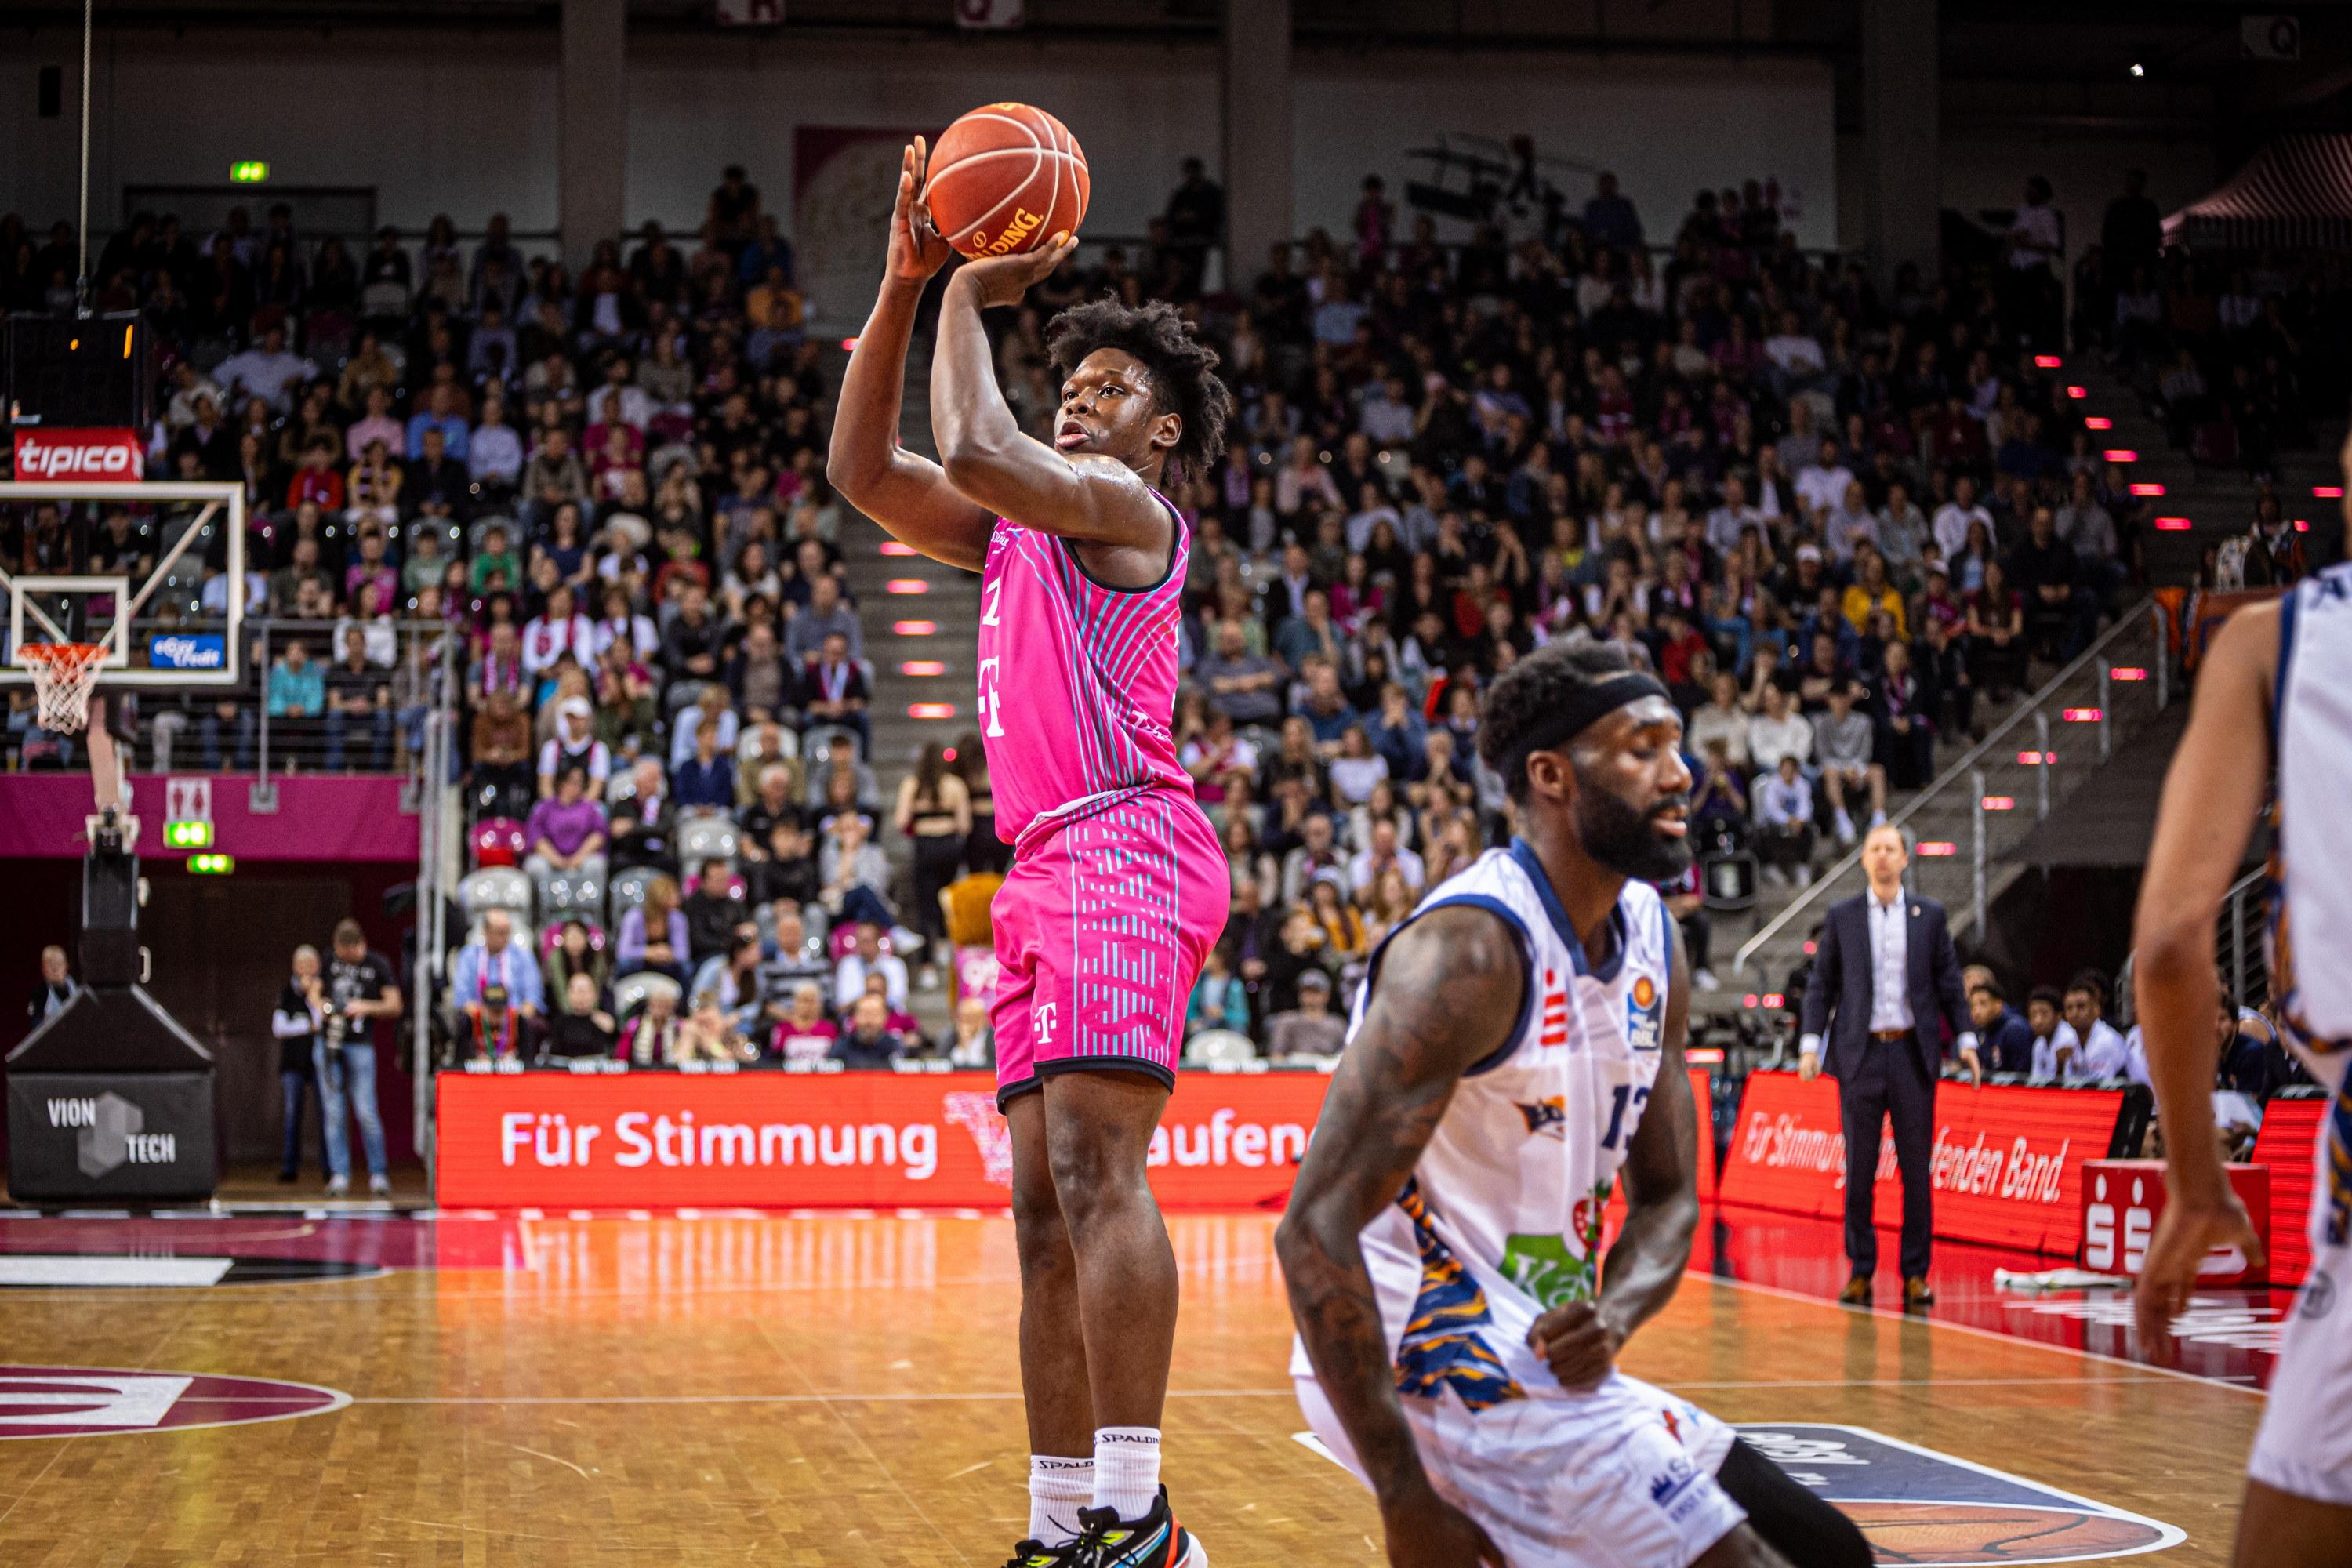 Telekom Baskets Bonn locked up a berth in the Play-Ins and stayed within striking distance of the direct playoffs spots with a convincing 112-89 victory at home over ROSTOCK SEAWOLVES. Brian Fobbs scored 23 points and Harald Frey picked up a double-double of 19 points and 11 assists as Bonn improved to 18-12 with five straight wins at the Telekom Dome. Rostock could not open some breathing room in their battle against relegation with a fourth loss in the last five games for an 8-22 record. Tyler Nelson and Derrick Alston both scored 22 points in the loss.